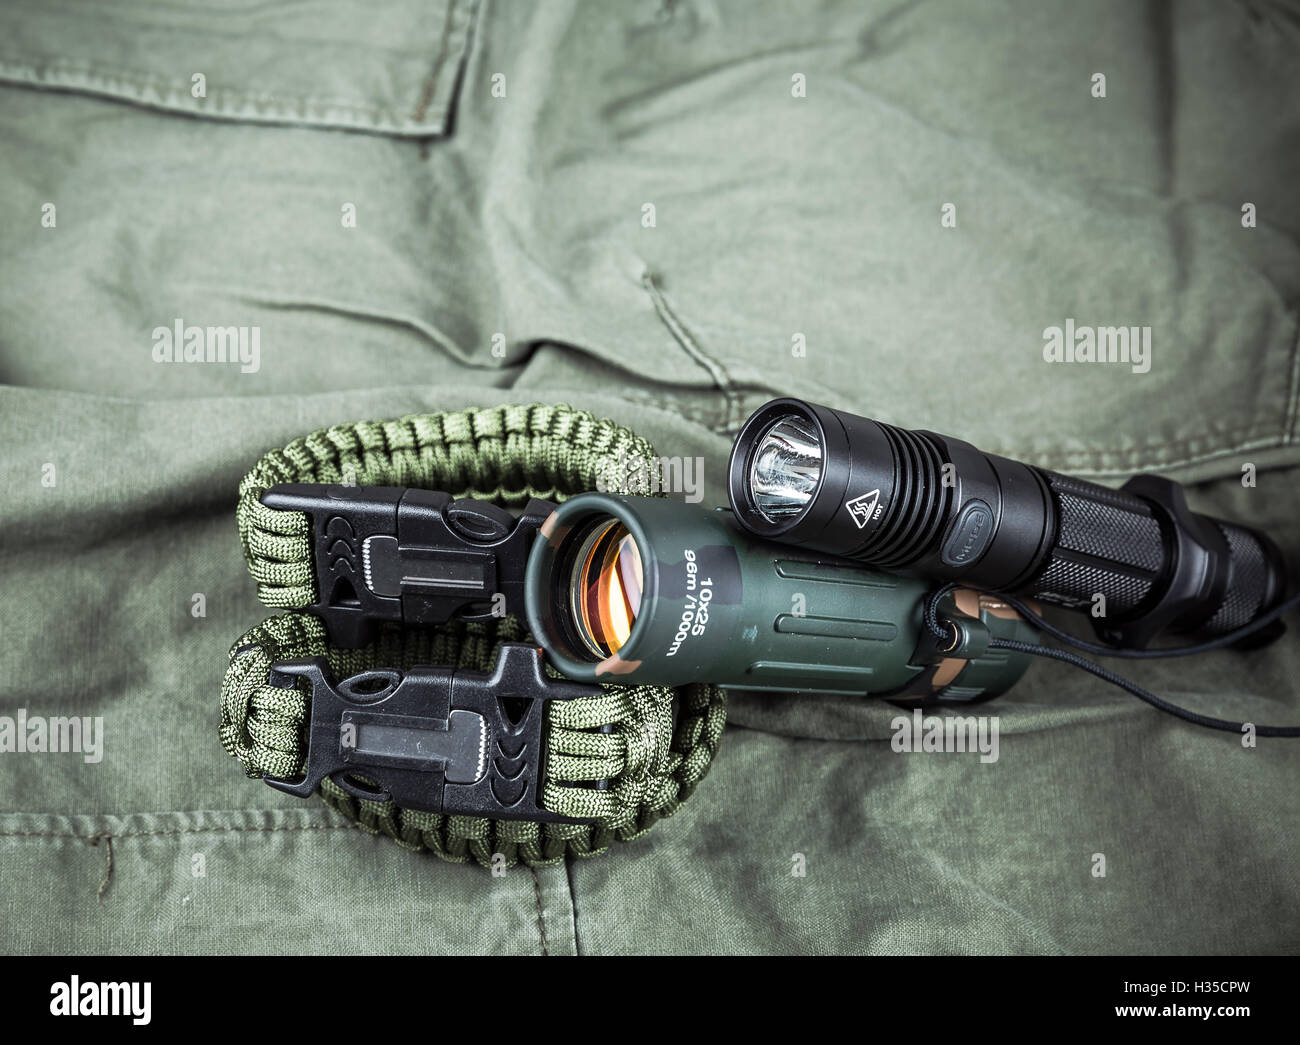 https://c8.alamy.com/comp/H35CPW/military-paracord-bracelet-tactical-torch-and-spy-glass-H35CPW.jpg